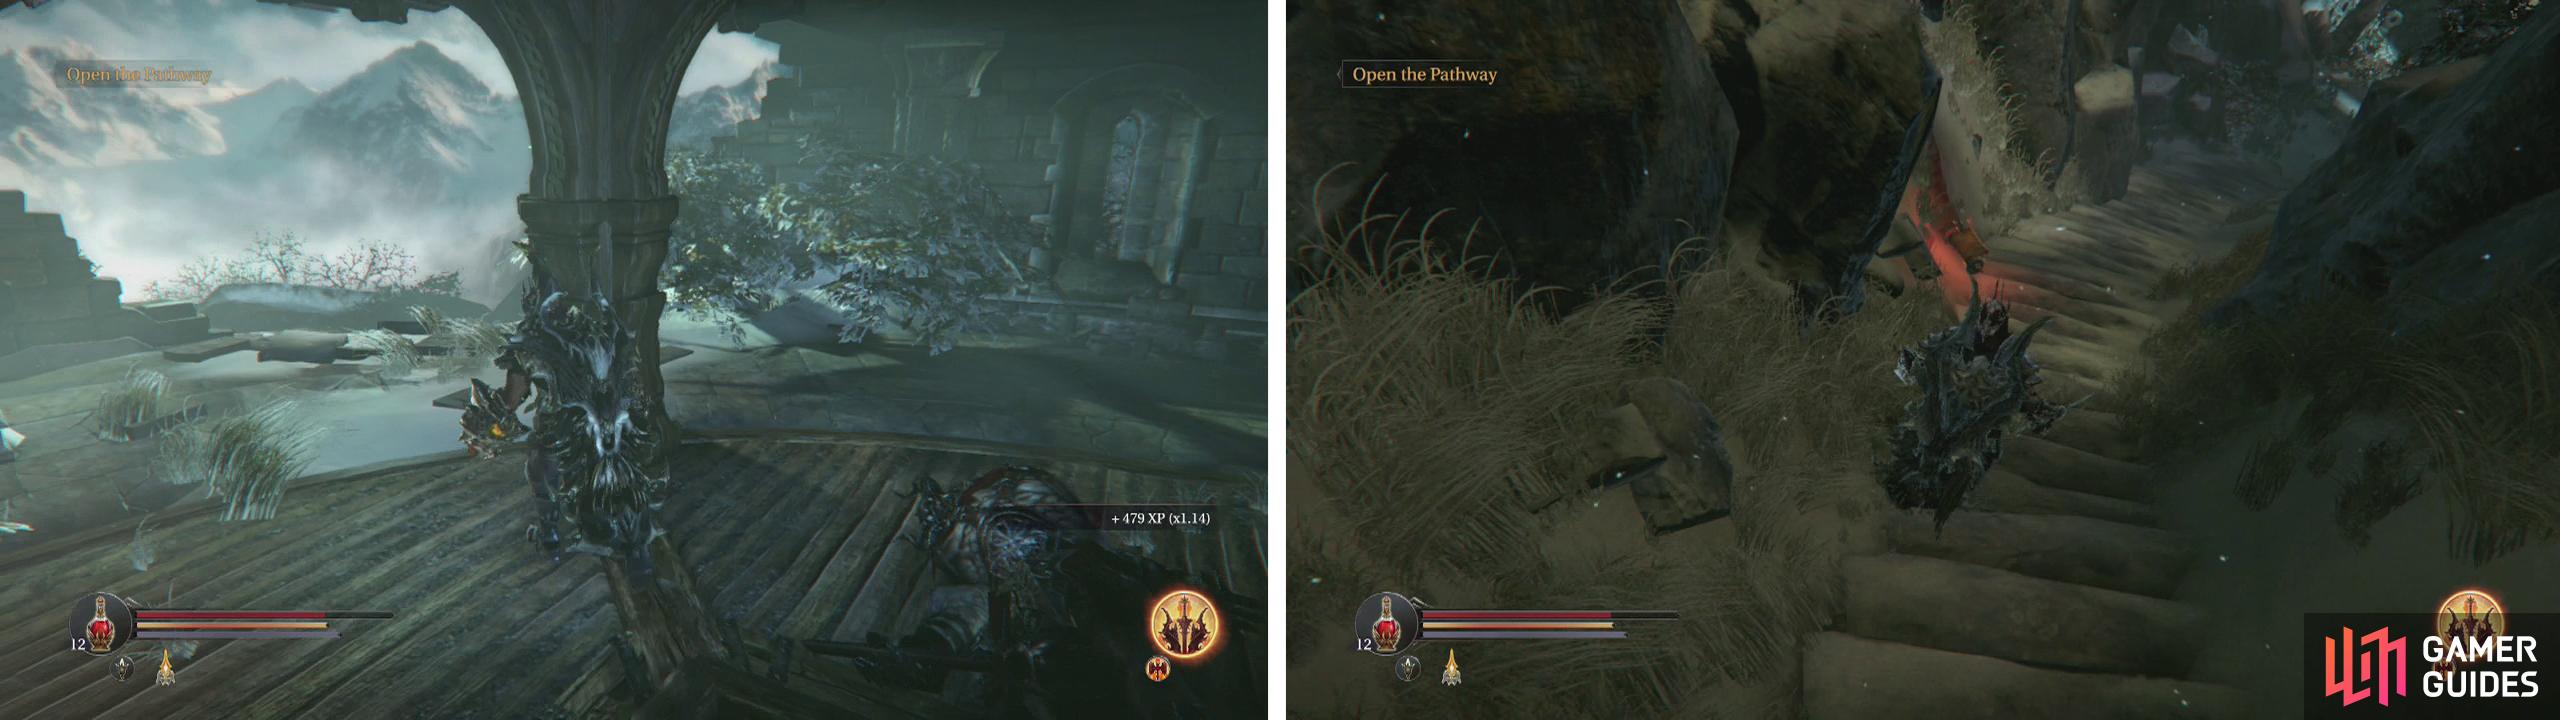 From the Burned Watchtower drop down from the broken wall to a path below (left). here youll find a chest and an Audio Note (right).